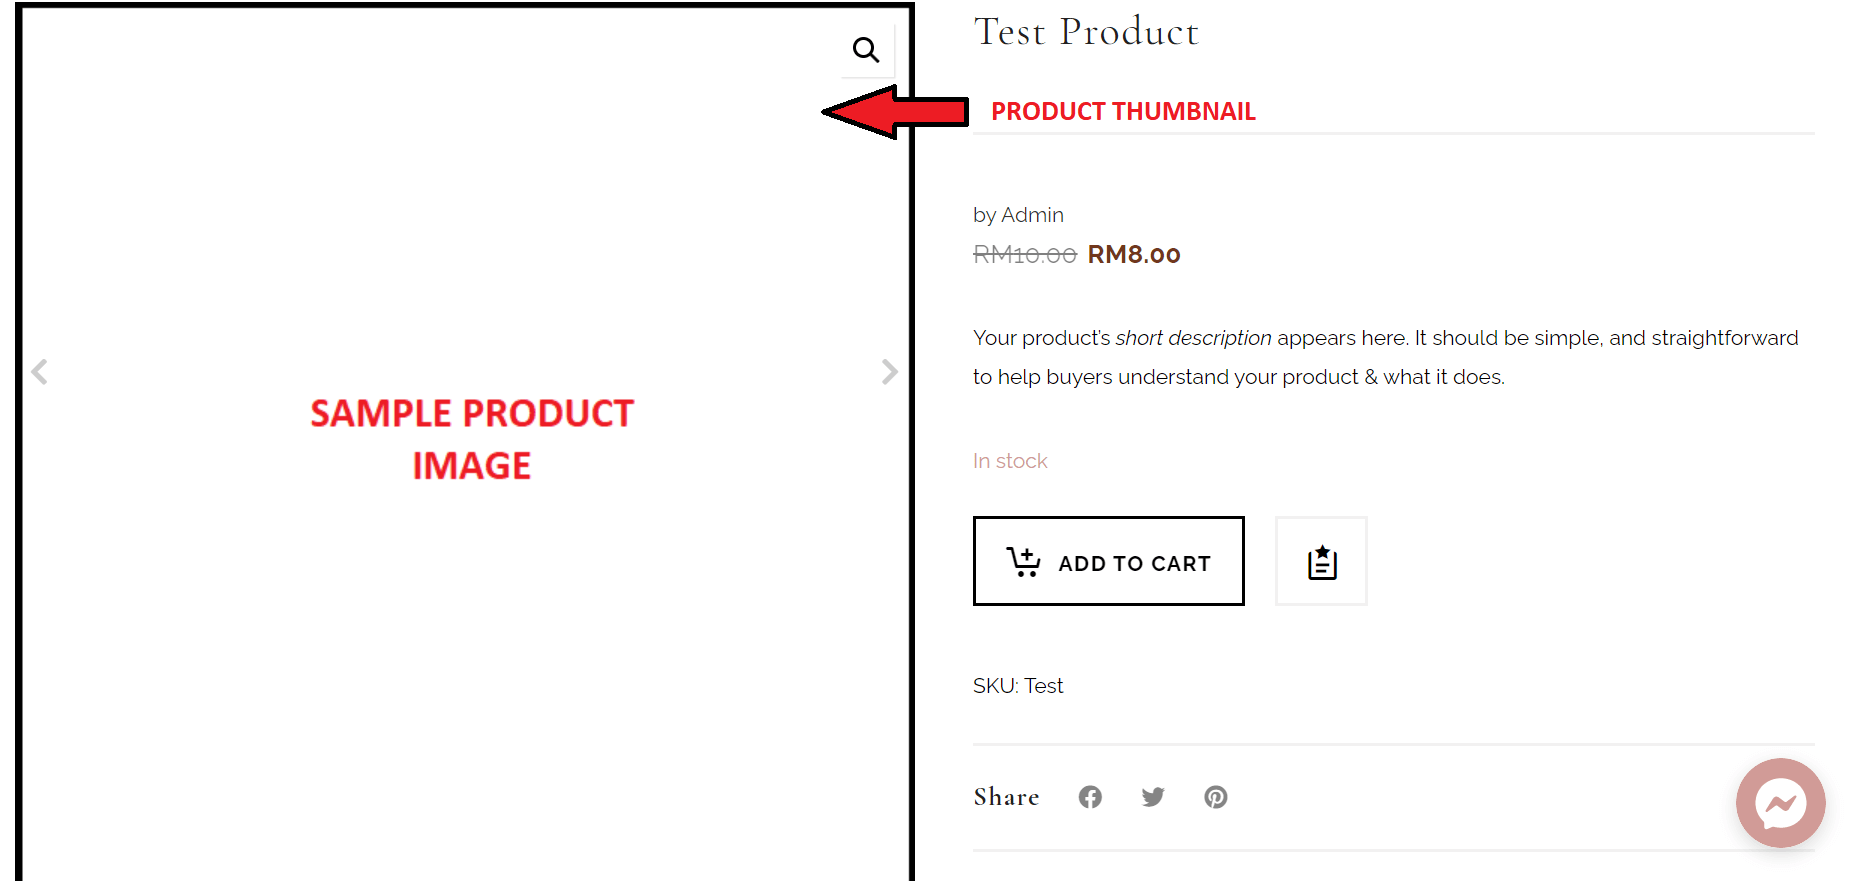 Product Thumbnail Guide